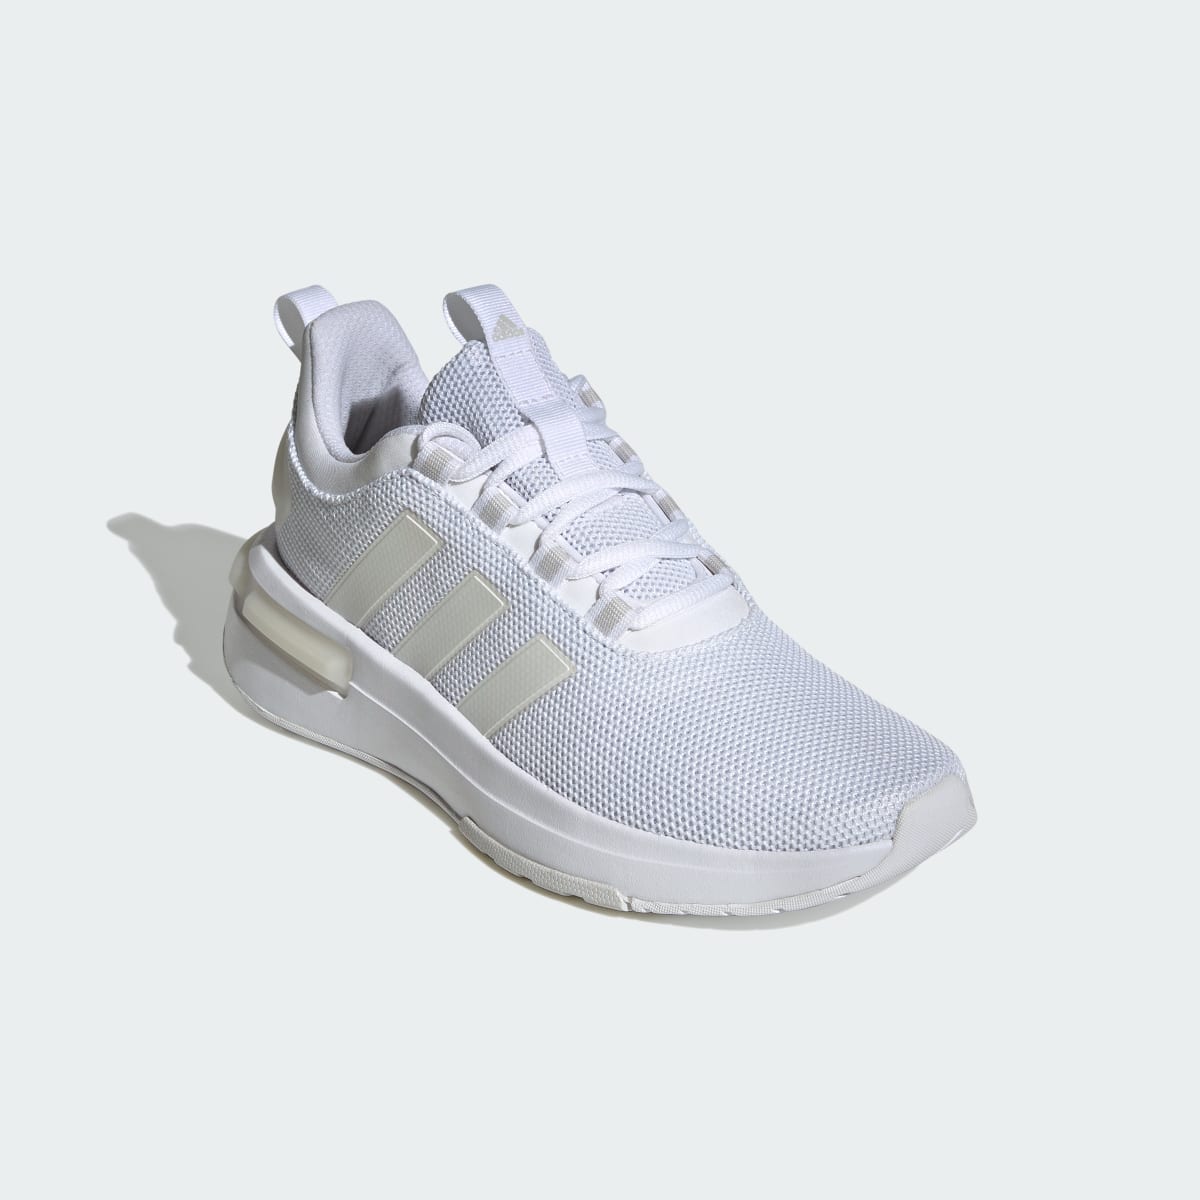 Adidas Racer TR23 Shoes. 5